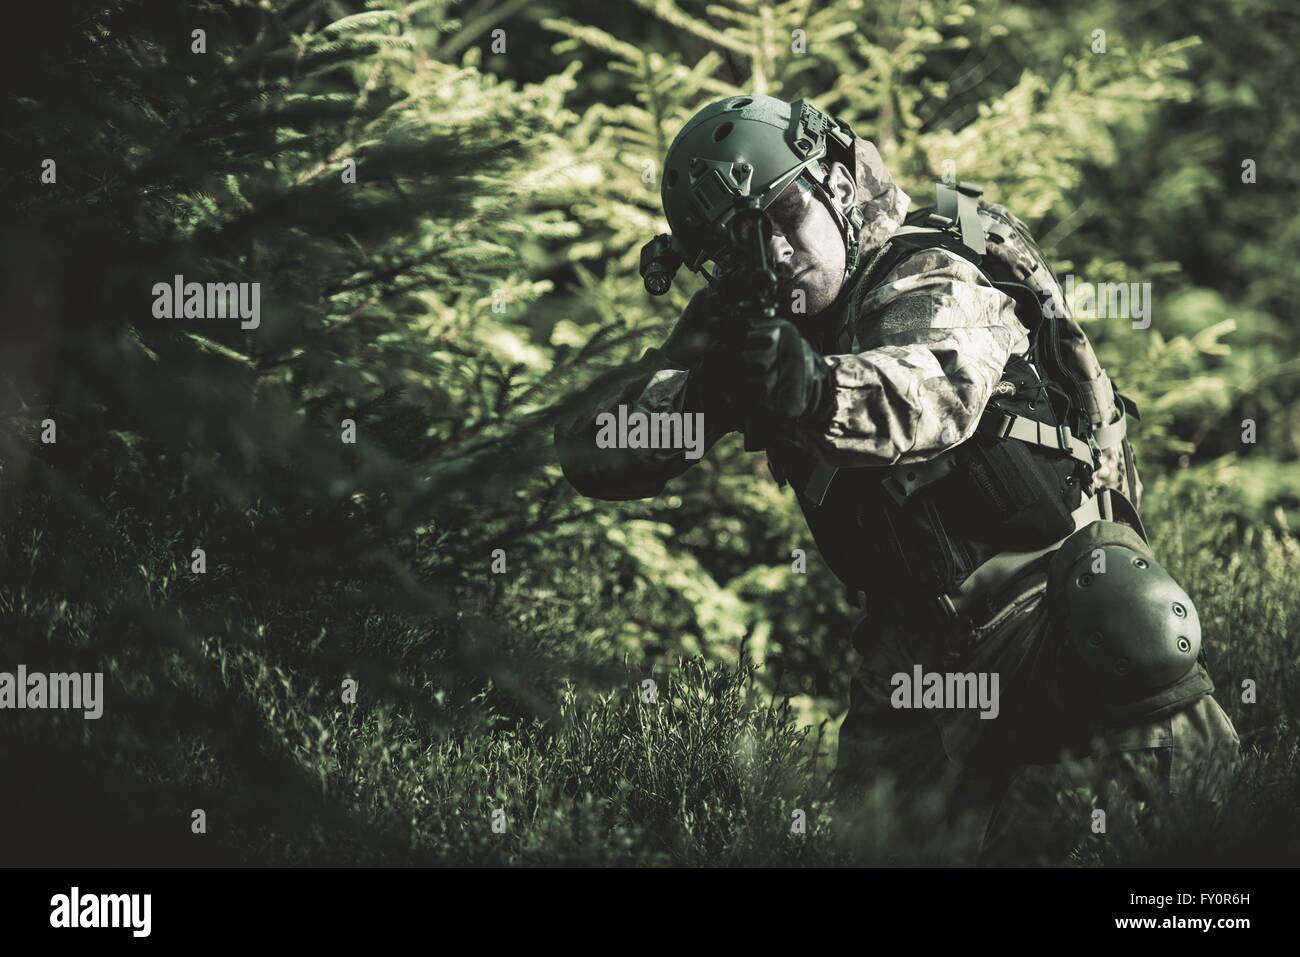 Special Forces Soldier. Camouflaged Marine Soldier Shooting Assault Rifle. Army Military Mission Concept Photo. Stock Photo